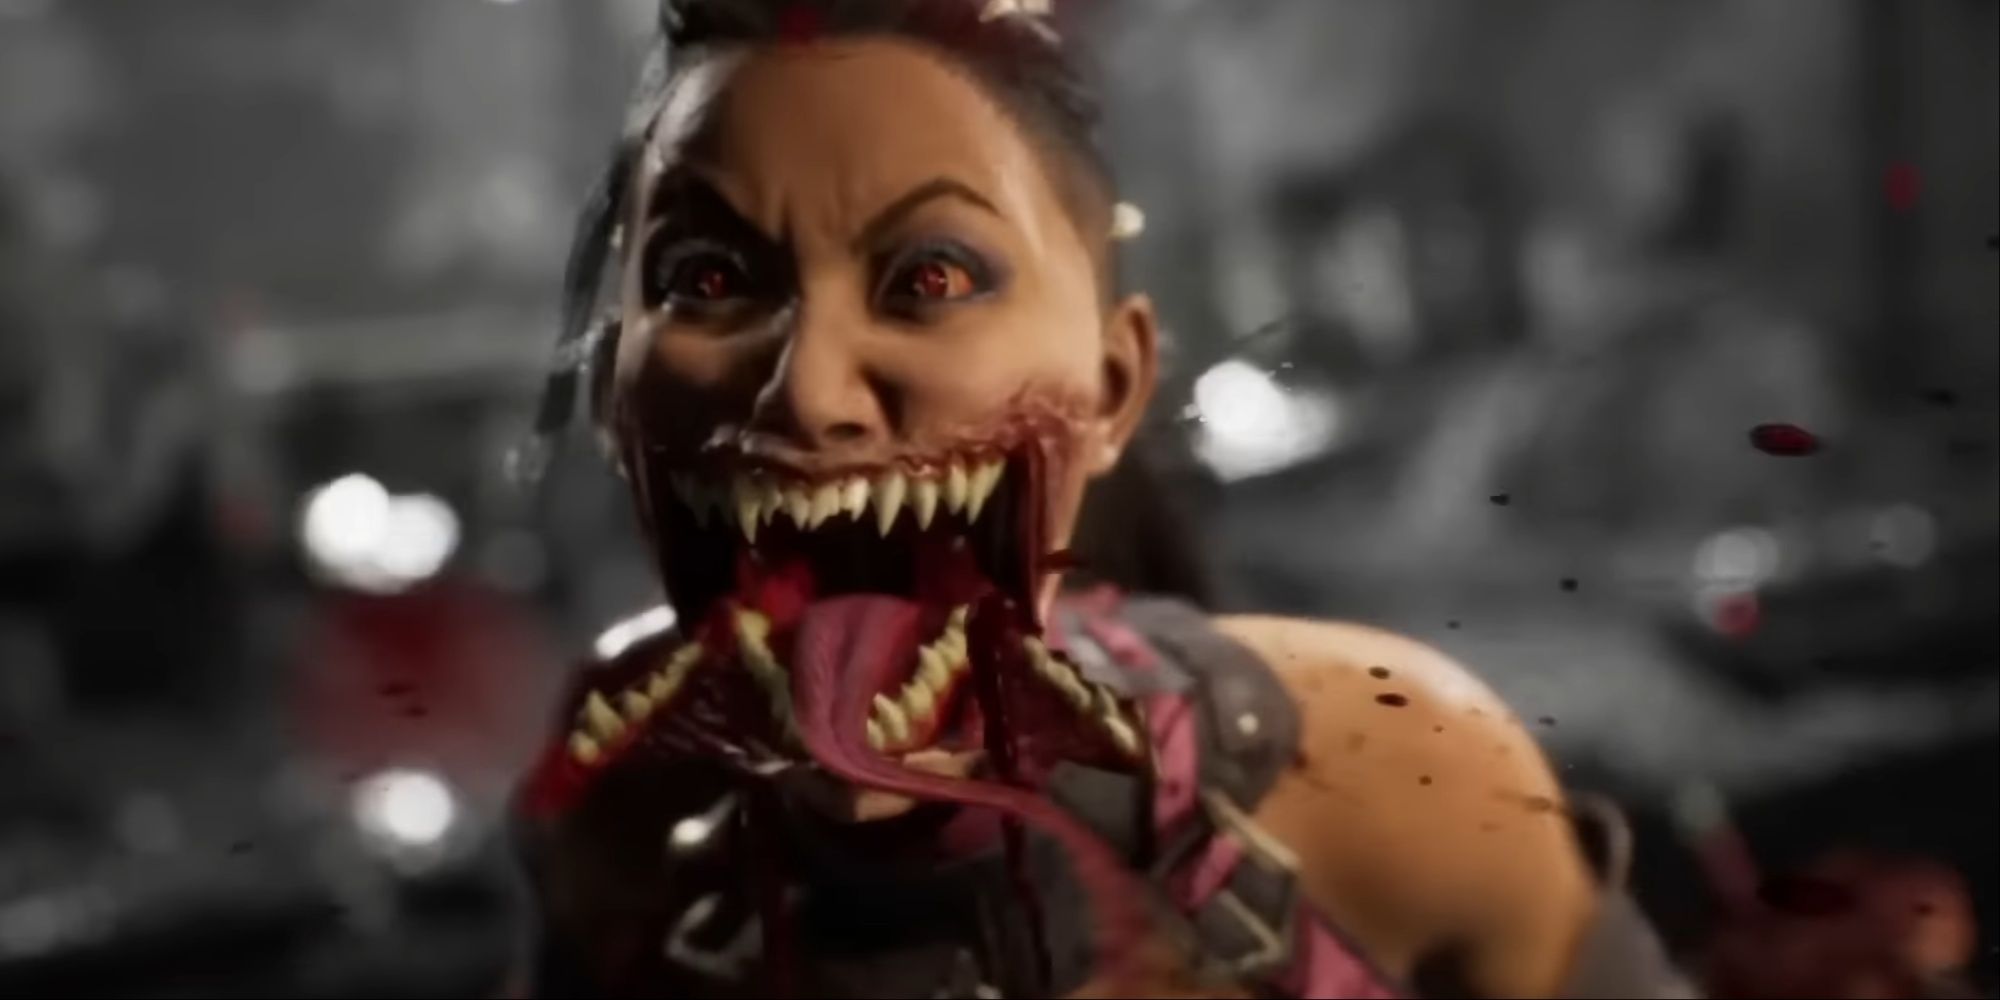 A close-up of Mileena's face with her mouth wide open and blood hitting the camera after her fatality.